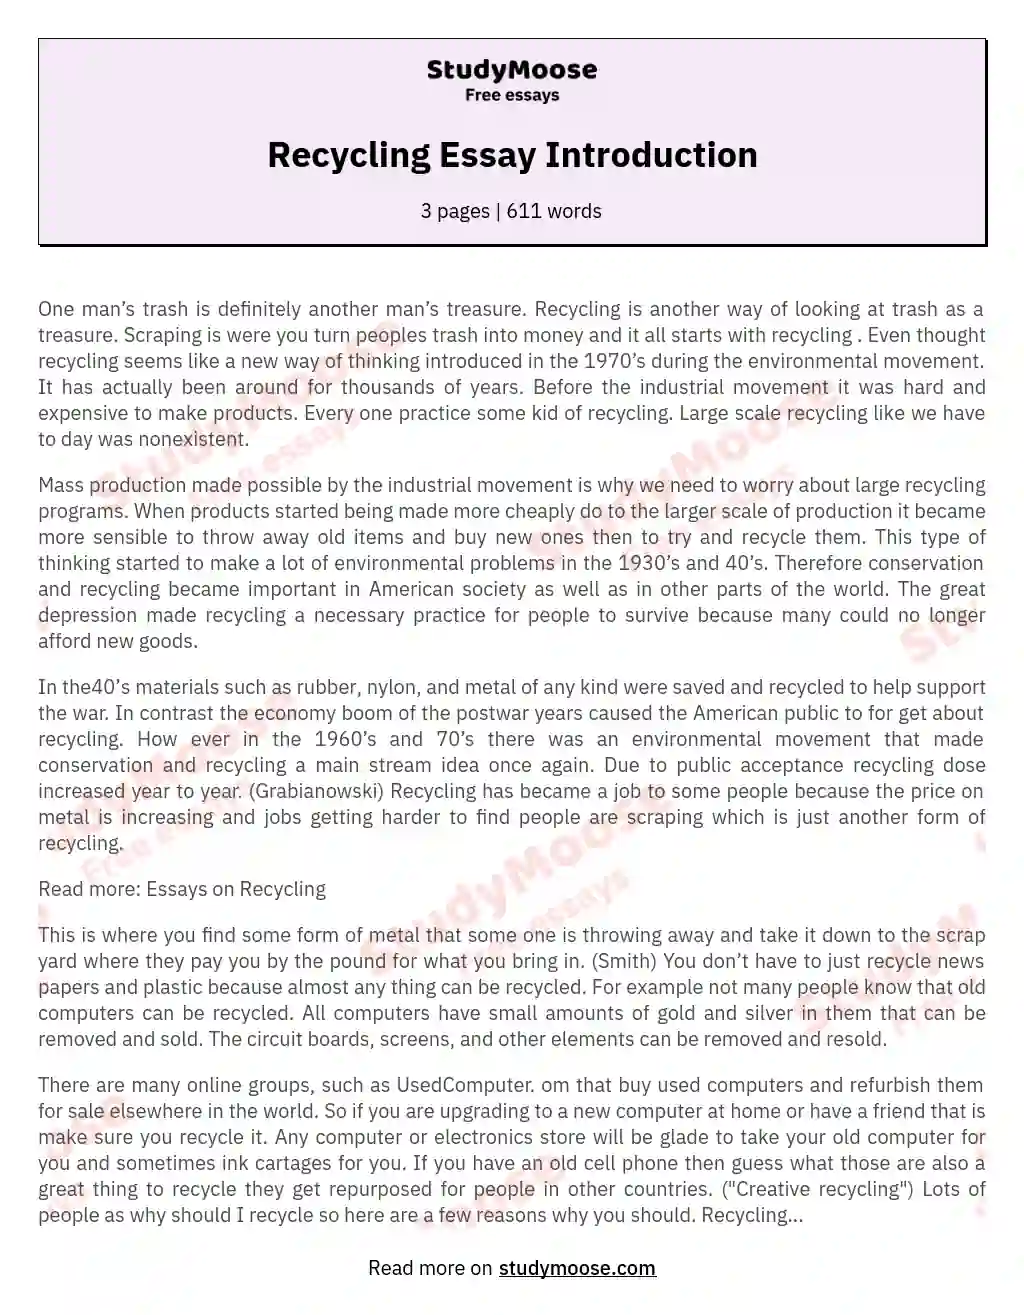 The Importance of Recycling in Preserving Our Environment essay